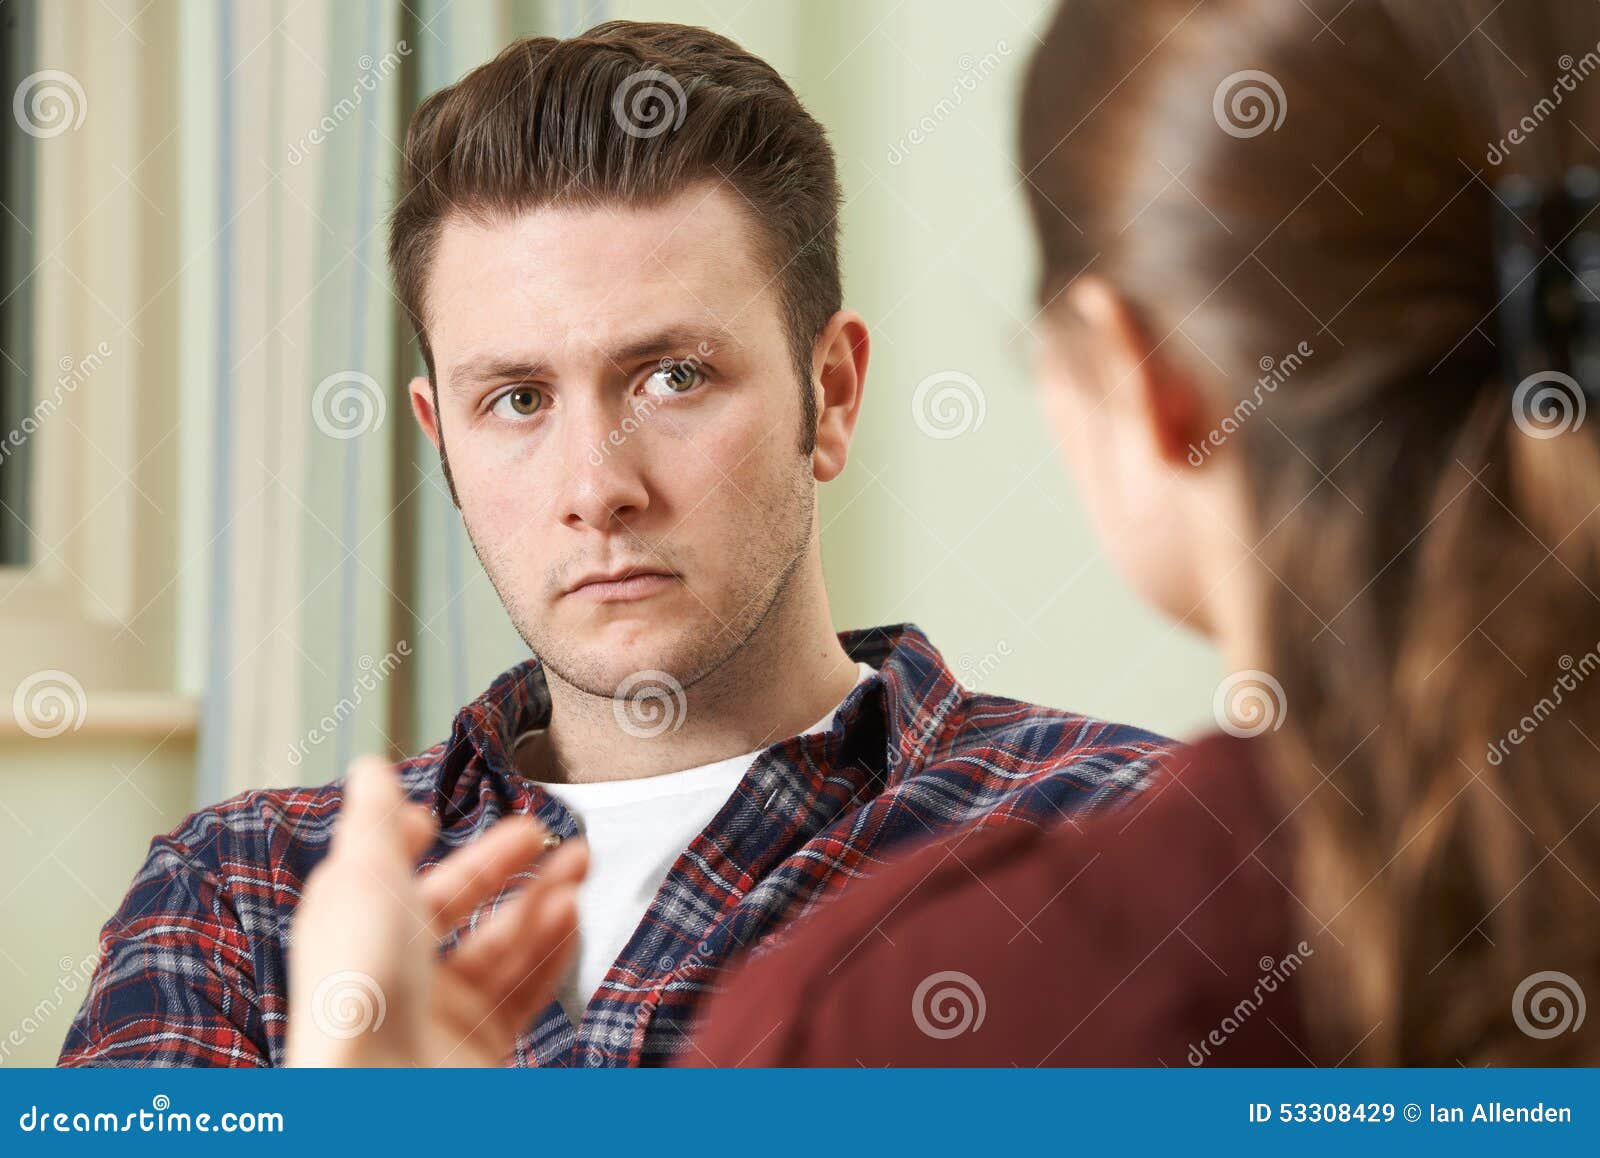 depressed young man talking to counsellor